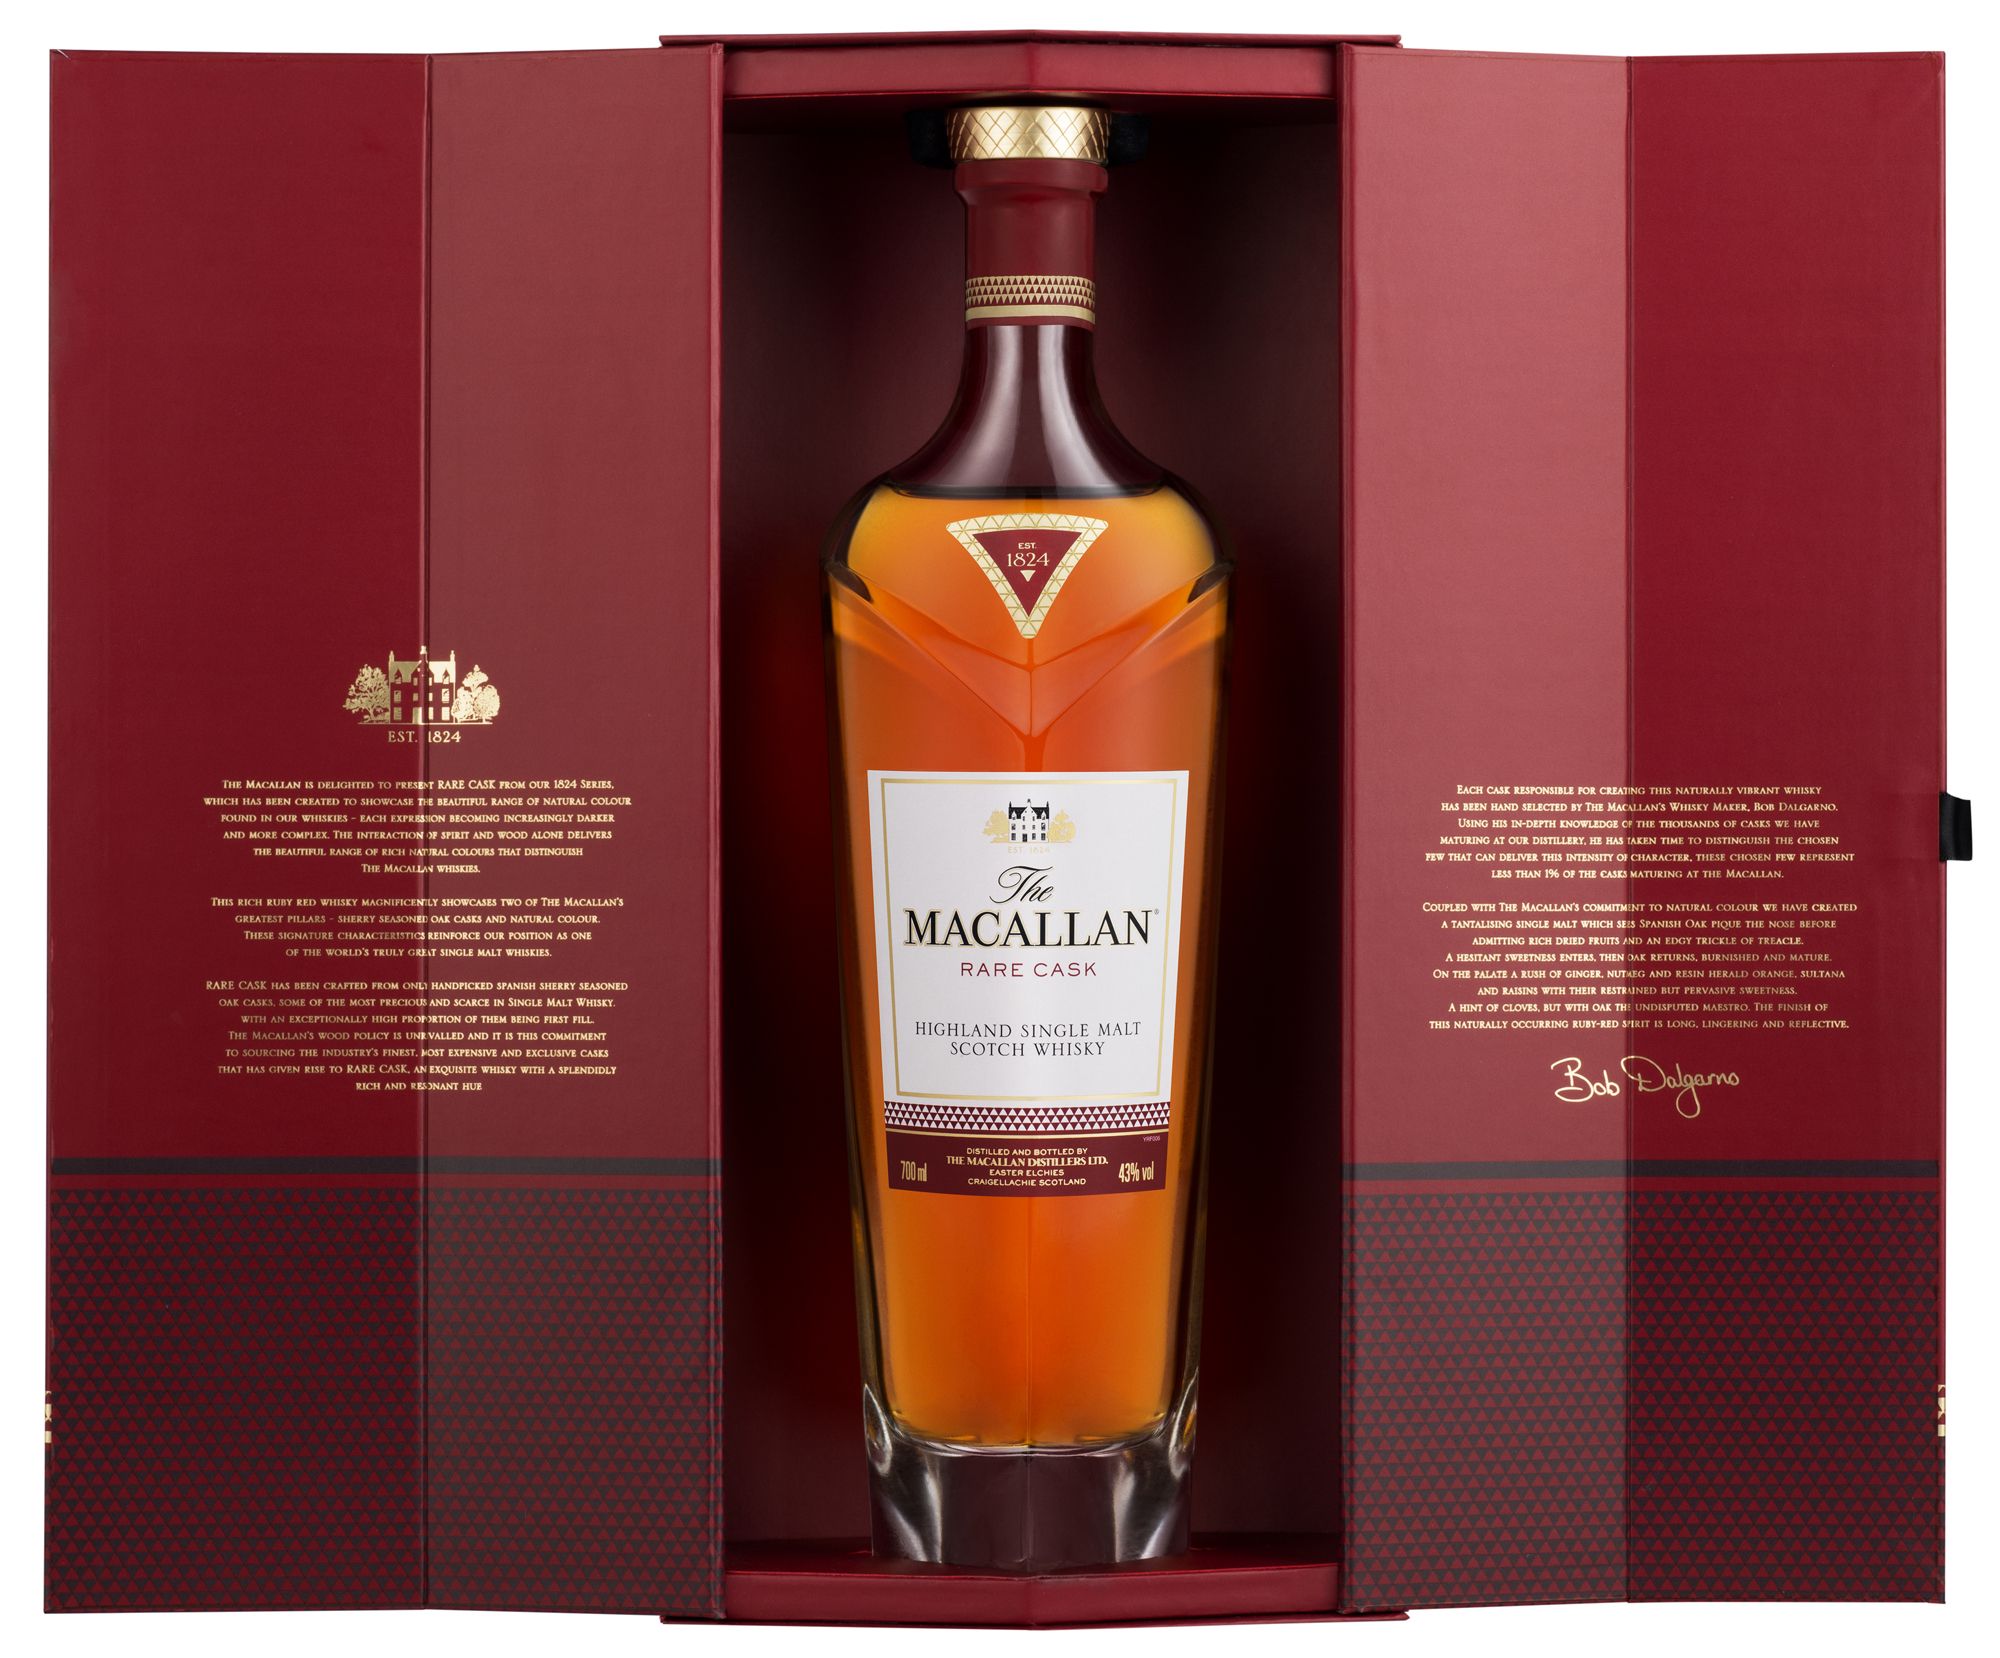 The 300 Macallan Rare Cask Whisky Is Calling Out to You